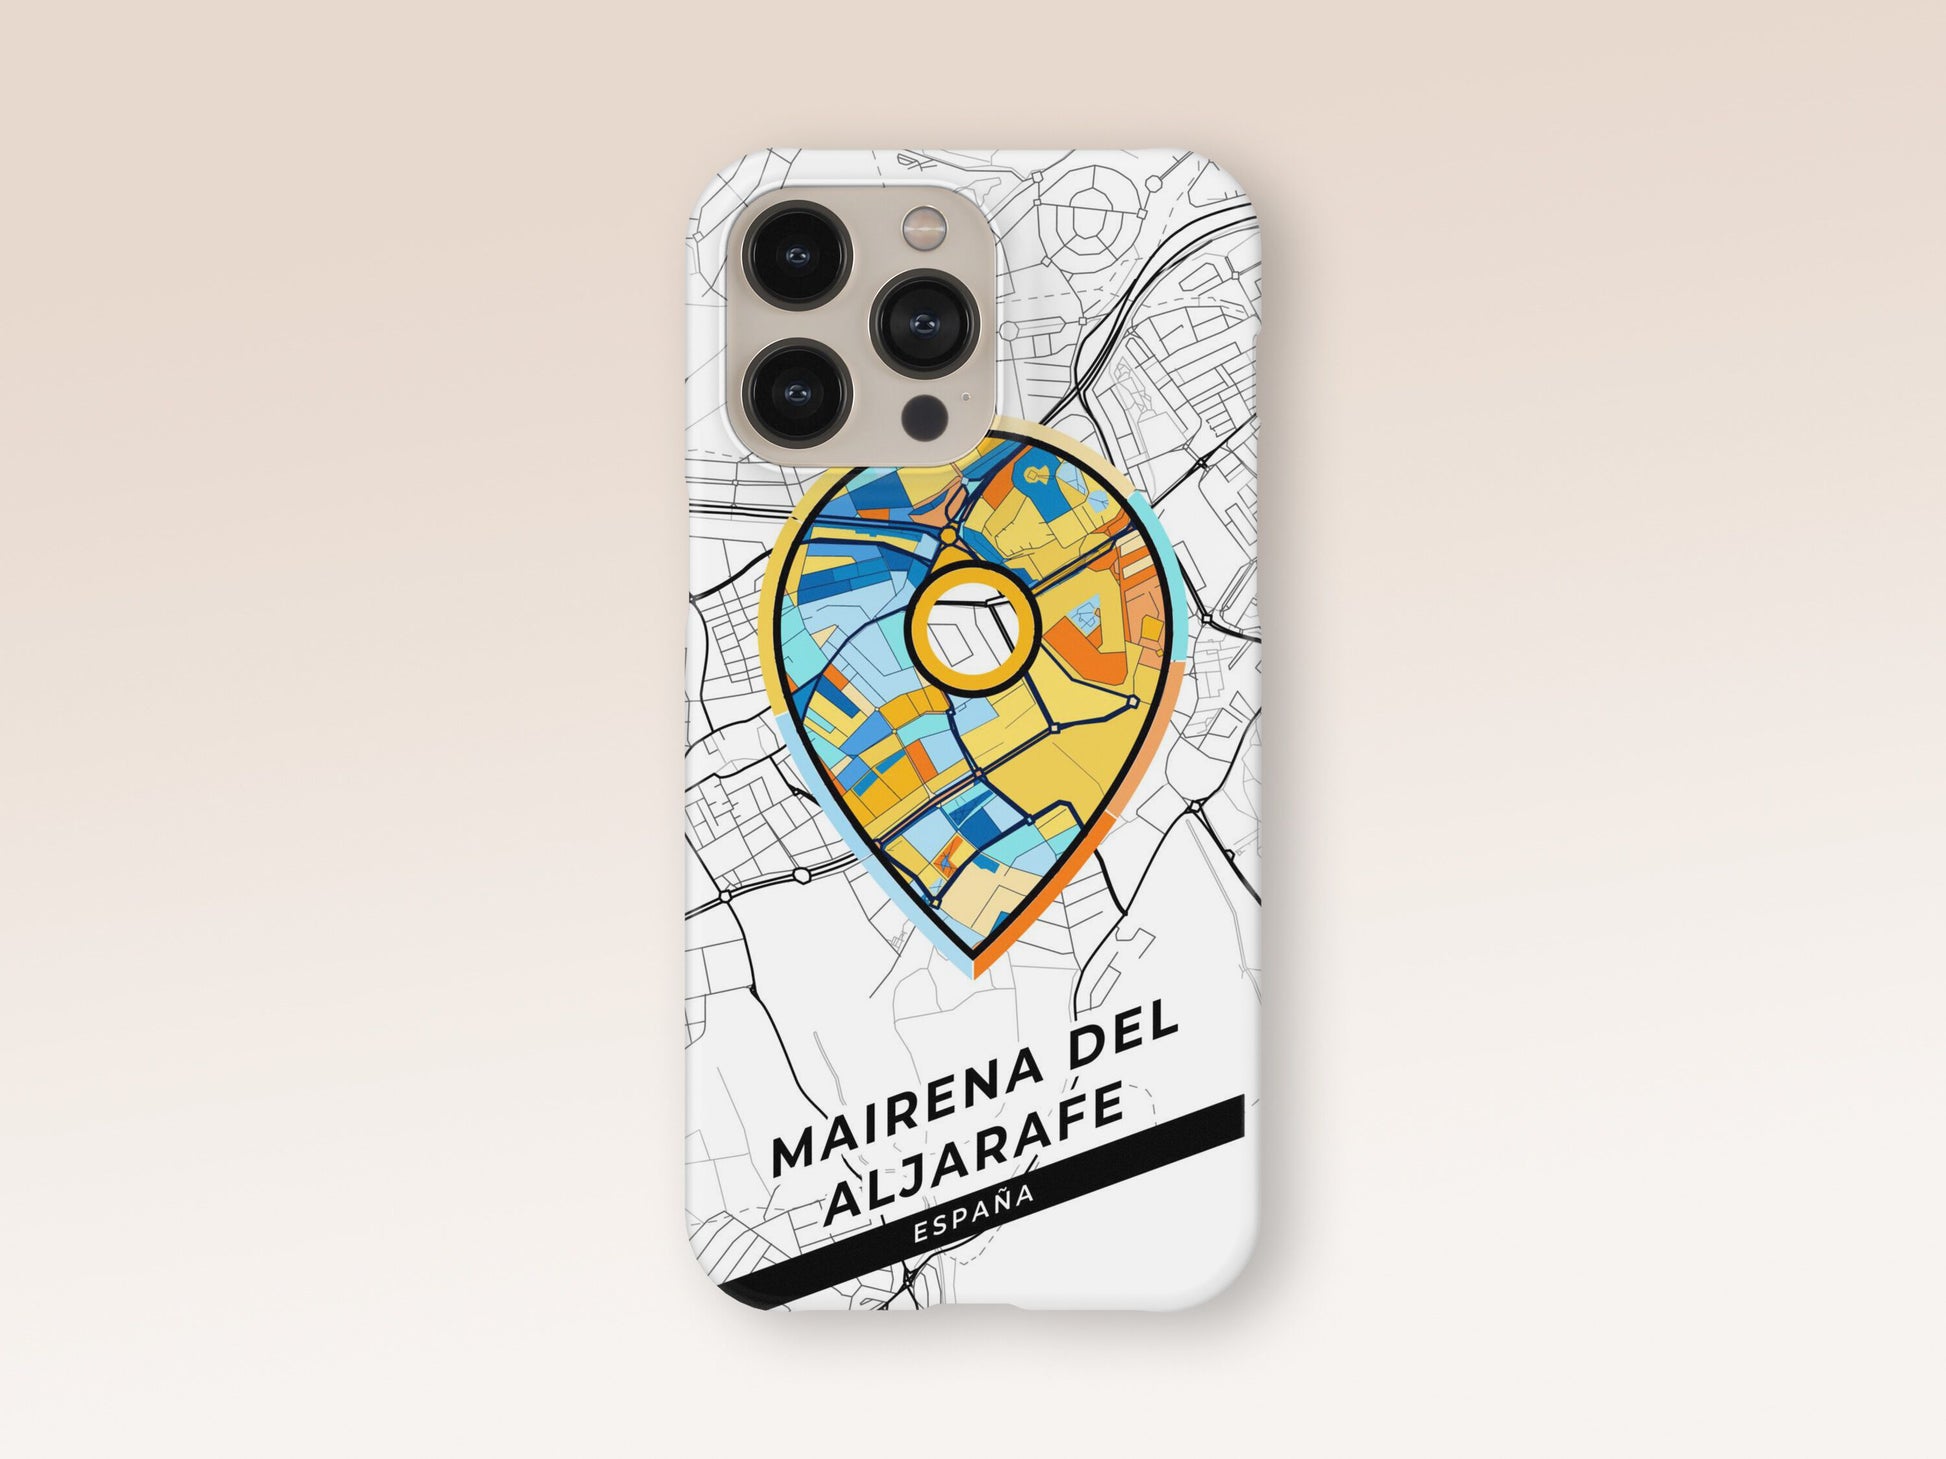 Mairena Del Aljarafe Spain slim phone case with colorful icon. Birthday, wedding or housewarming gift. Couple match cases. 1